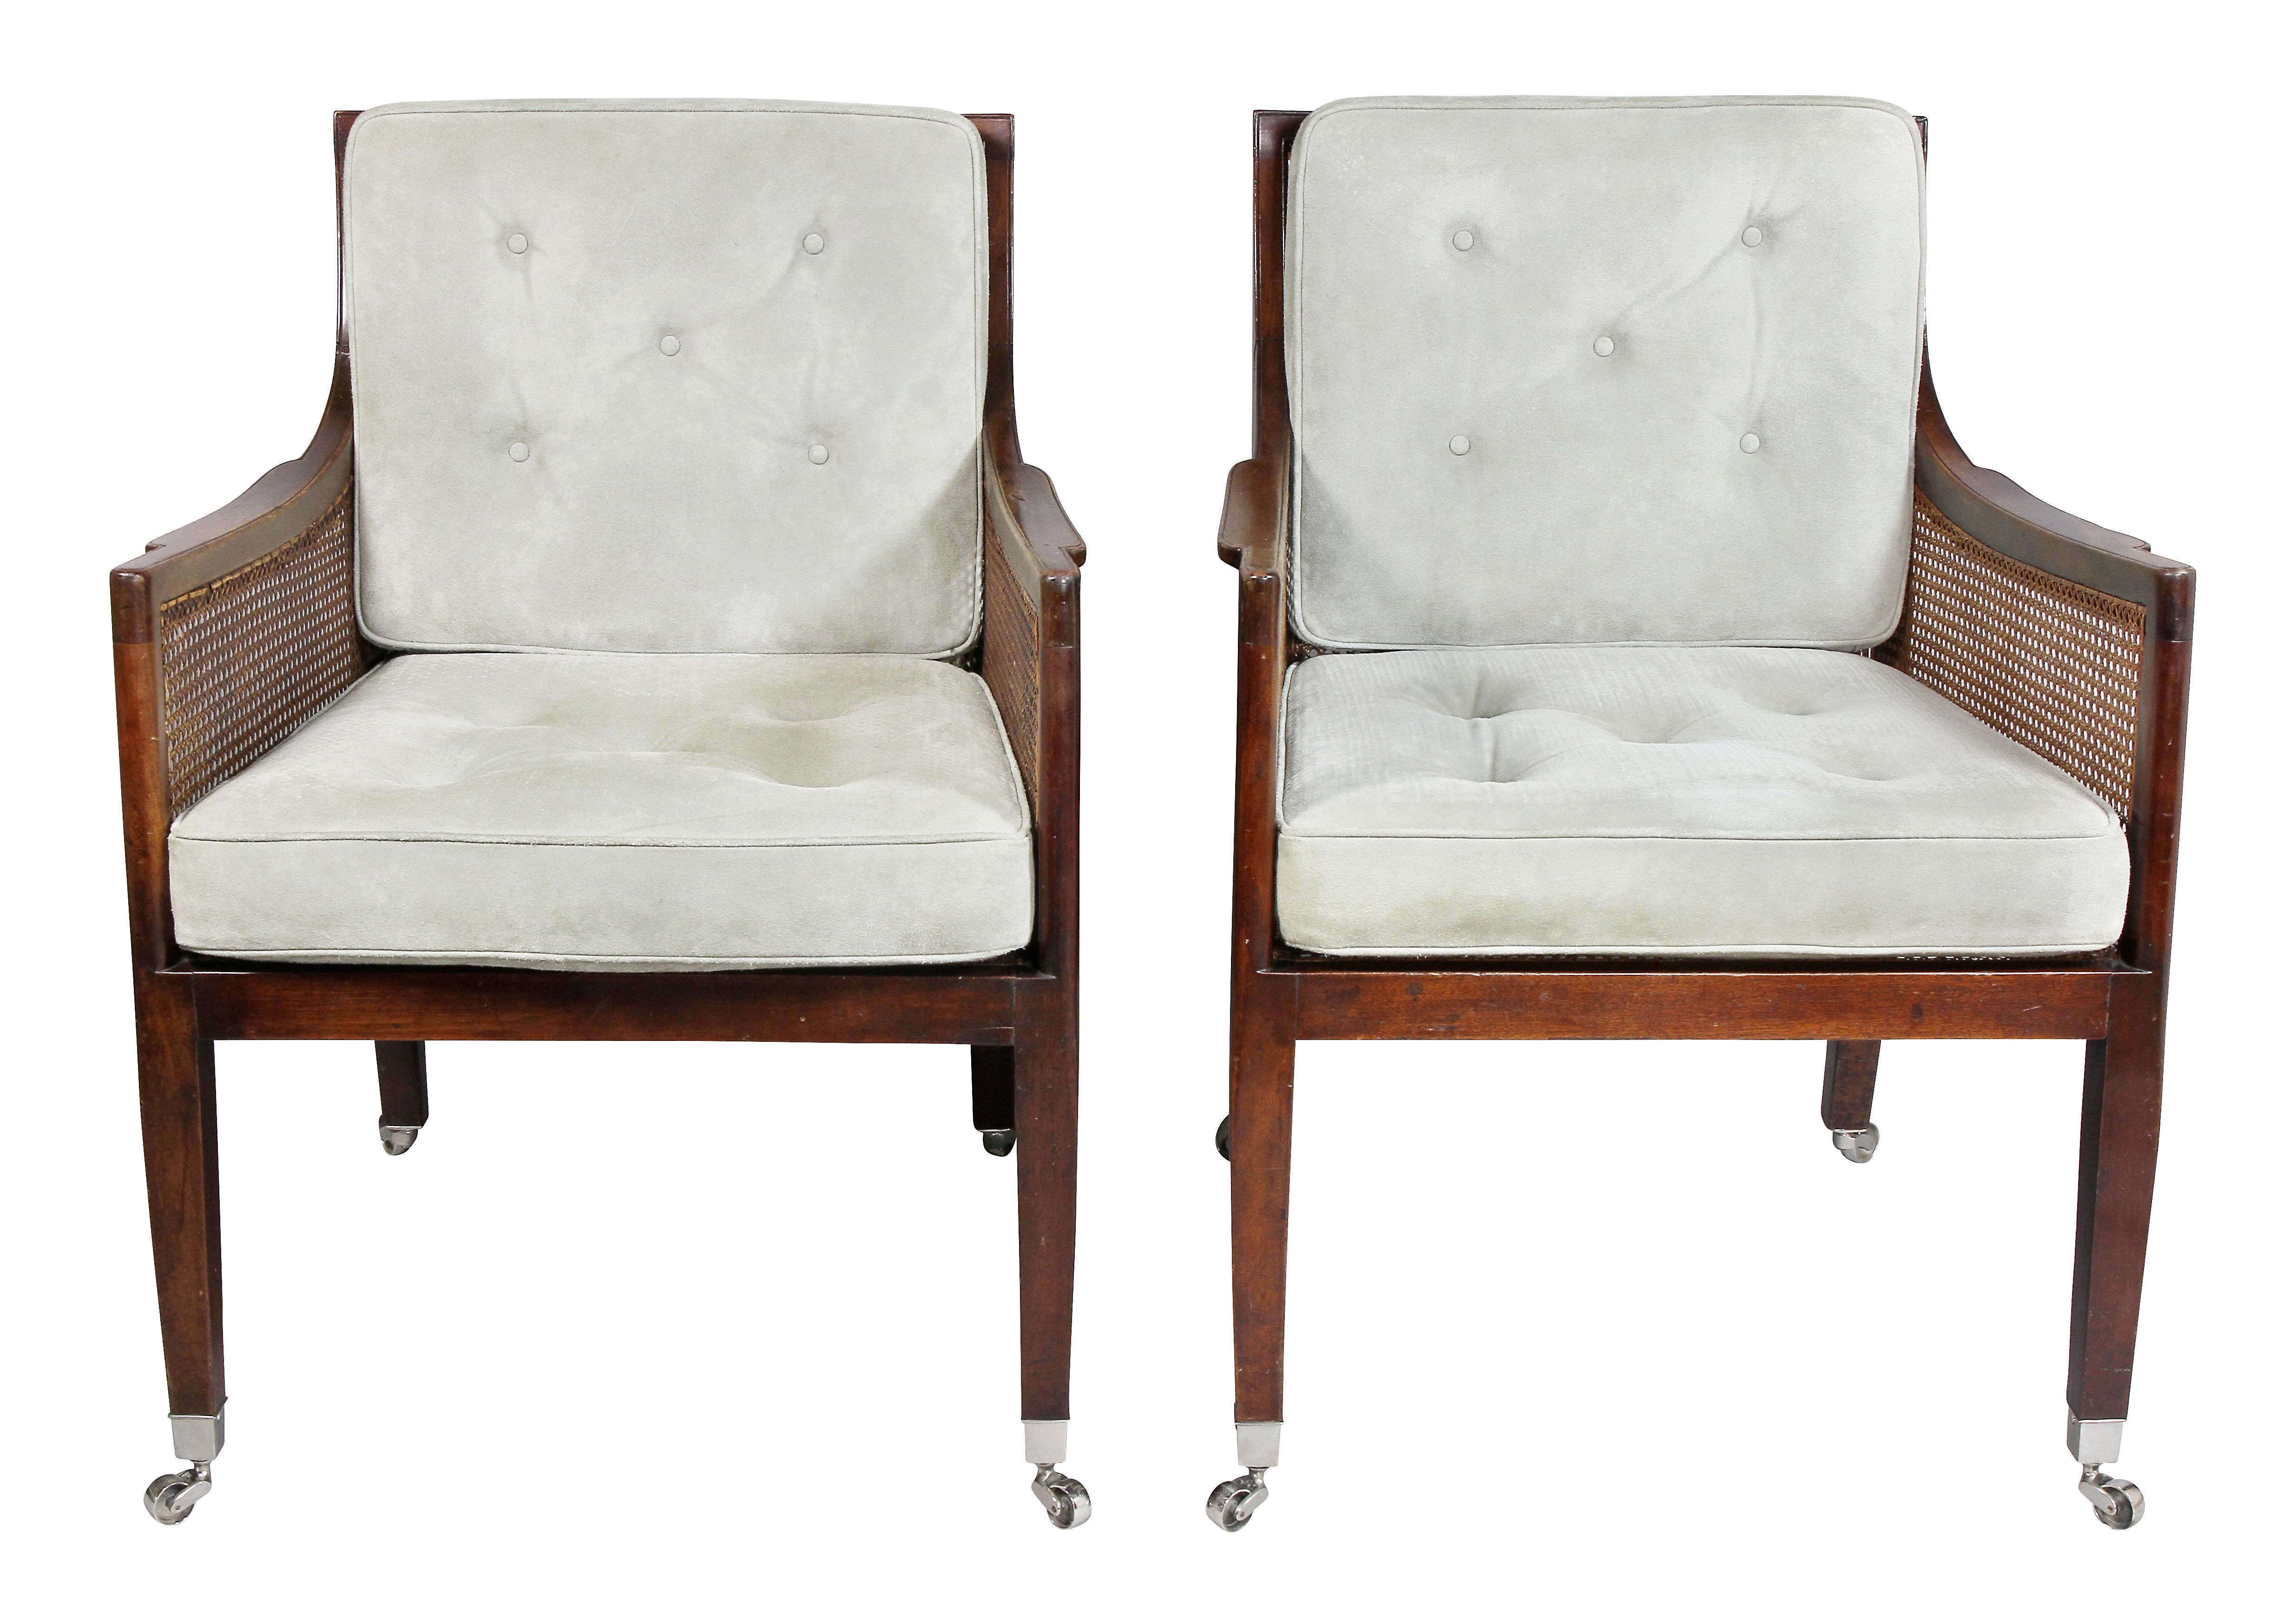 19th Century Pair of Regency Mahogany and Caned Armchairs